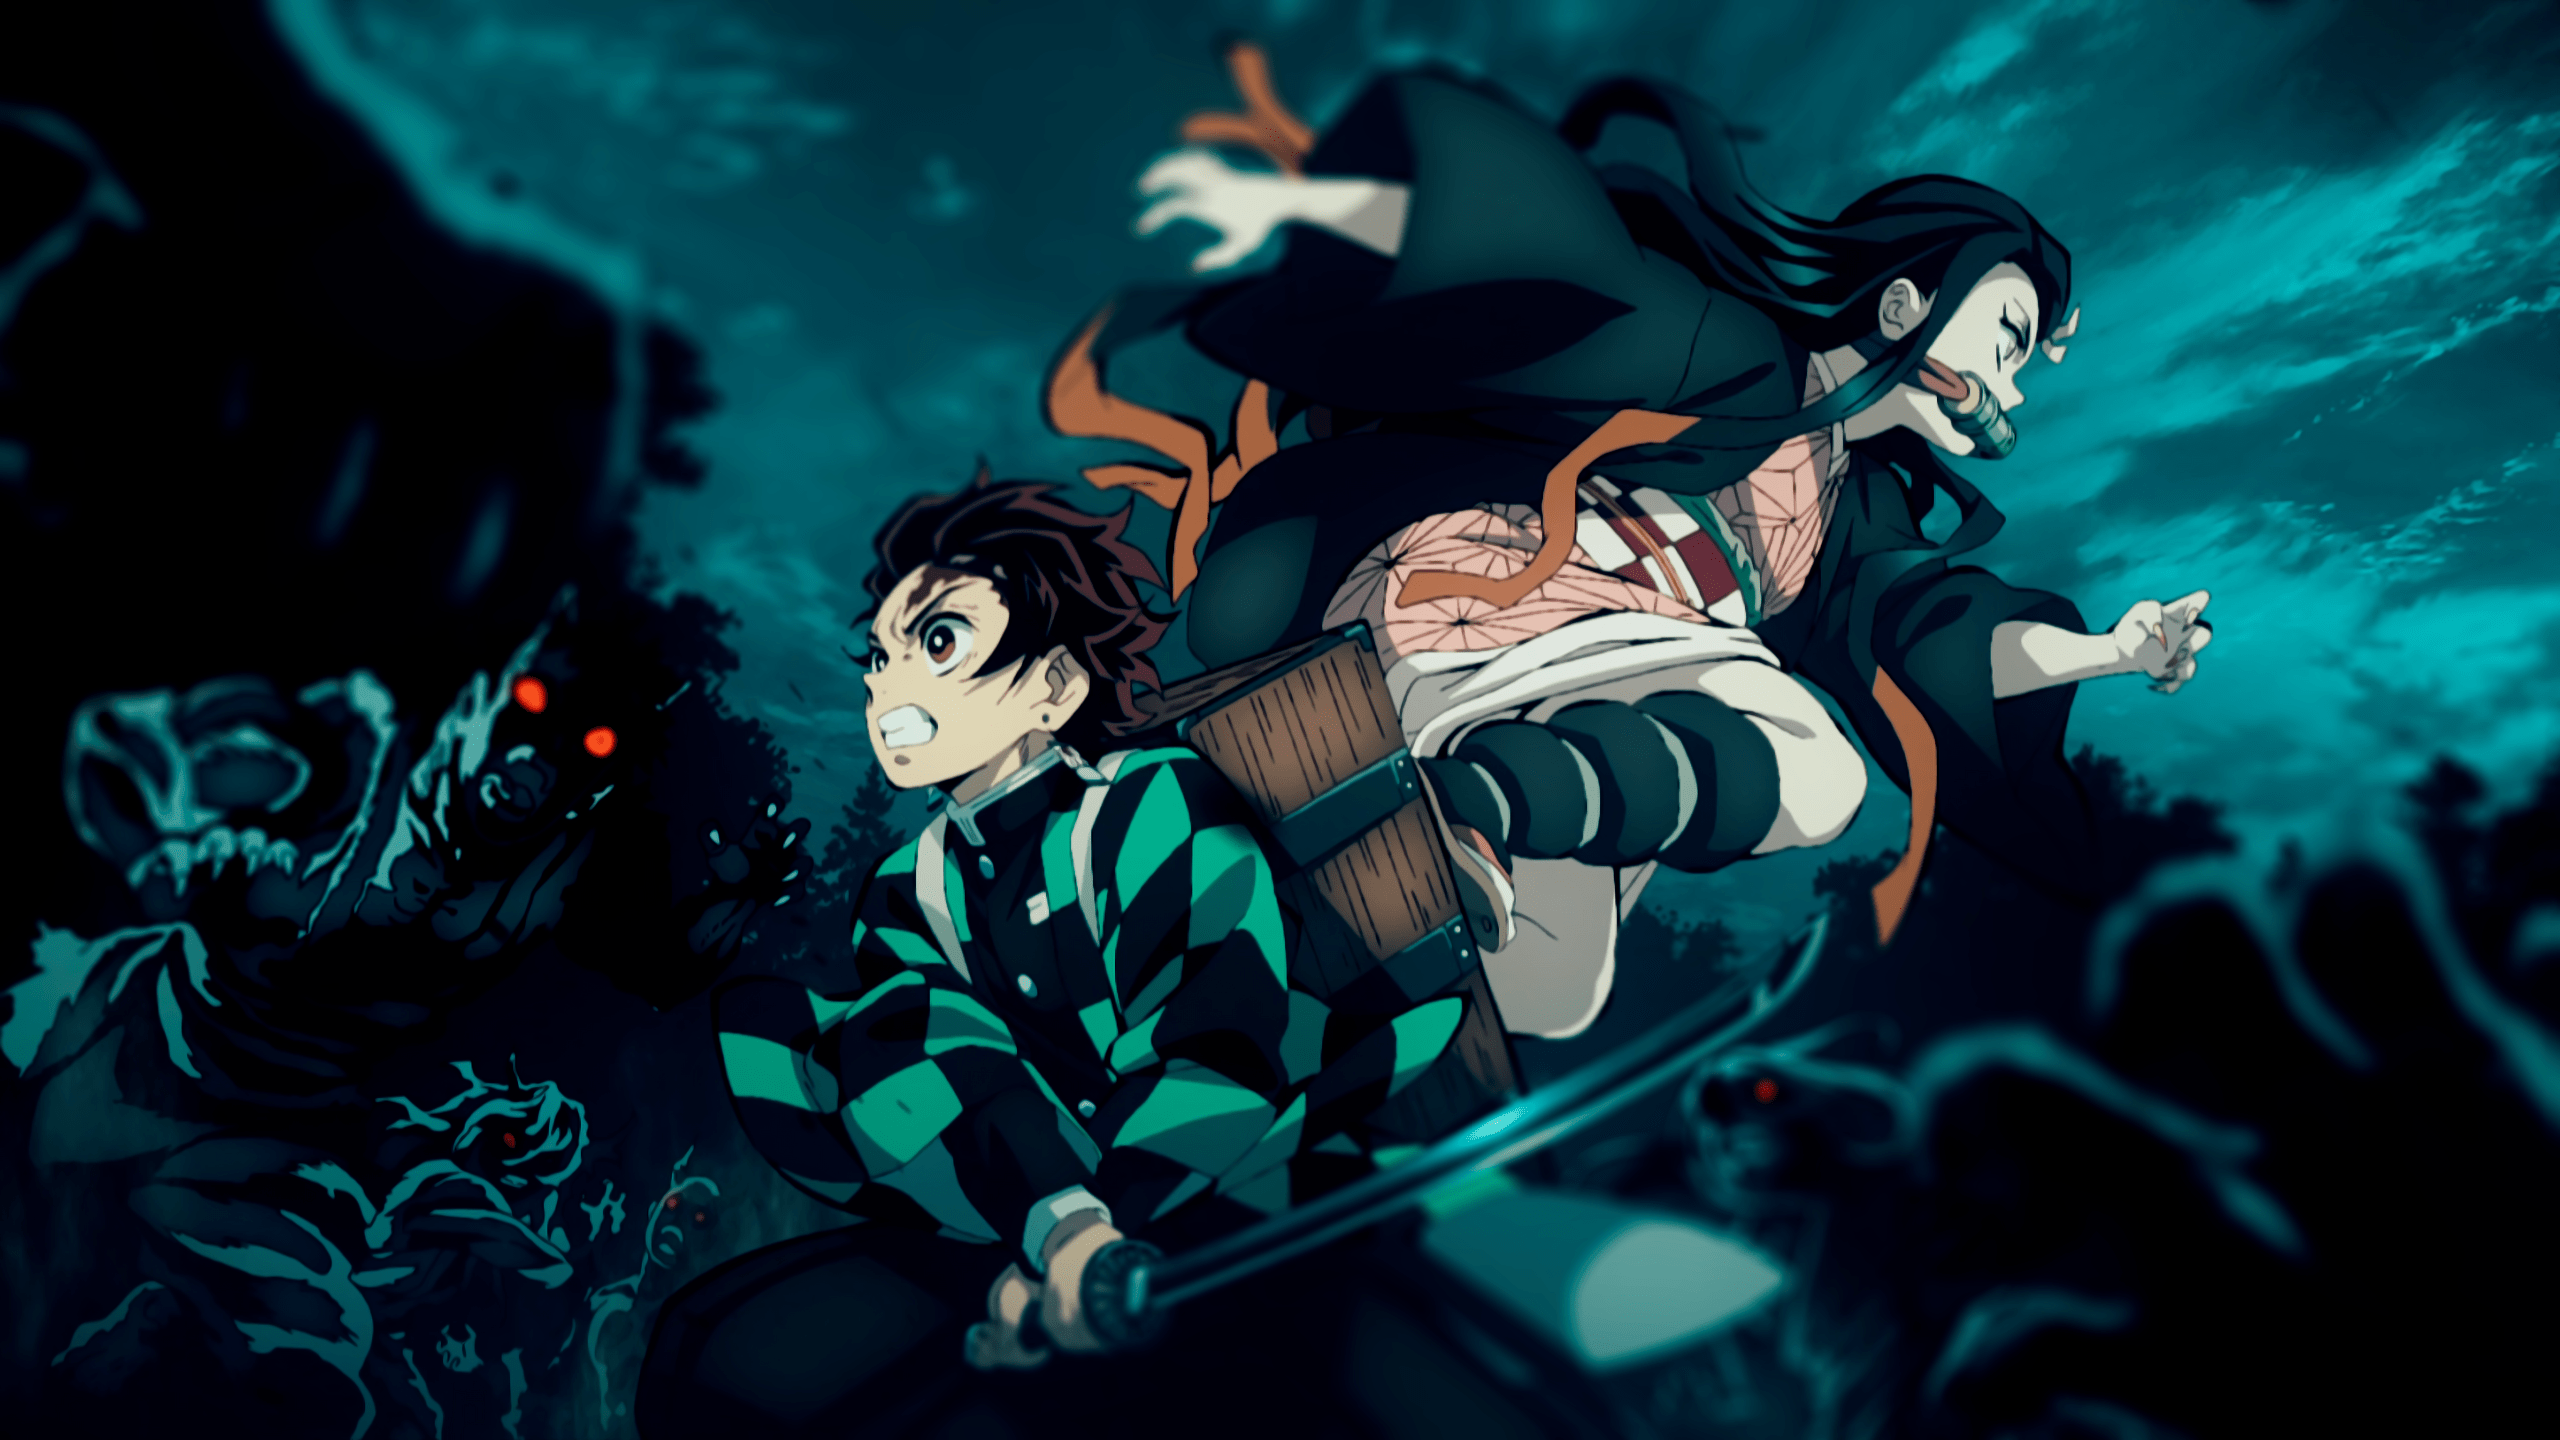 Anime wallpaper with two characters in the dark - Nezuko, Demon Slayer